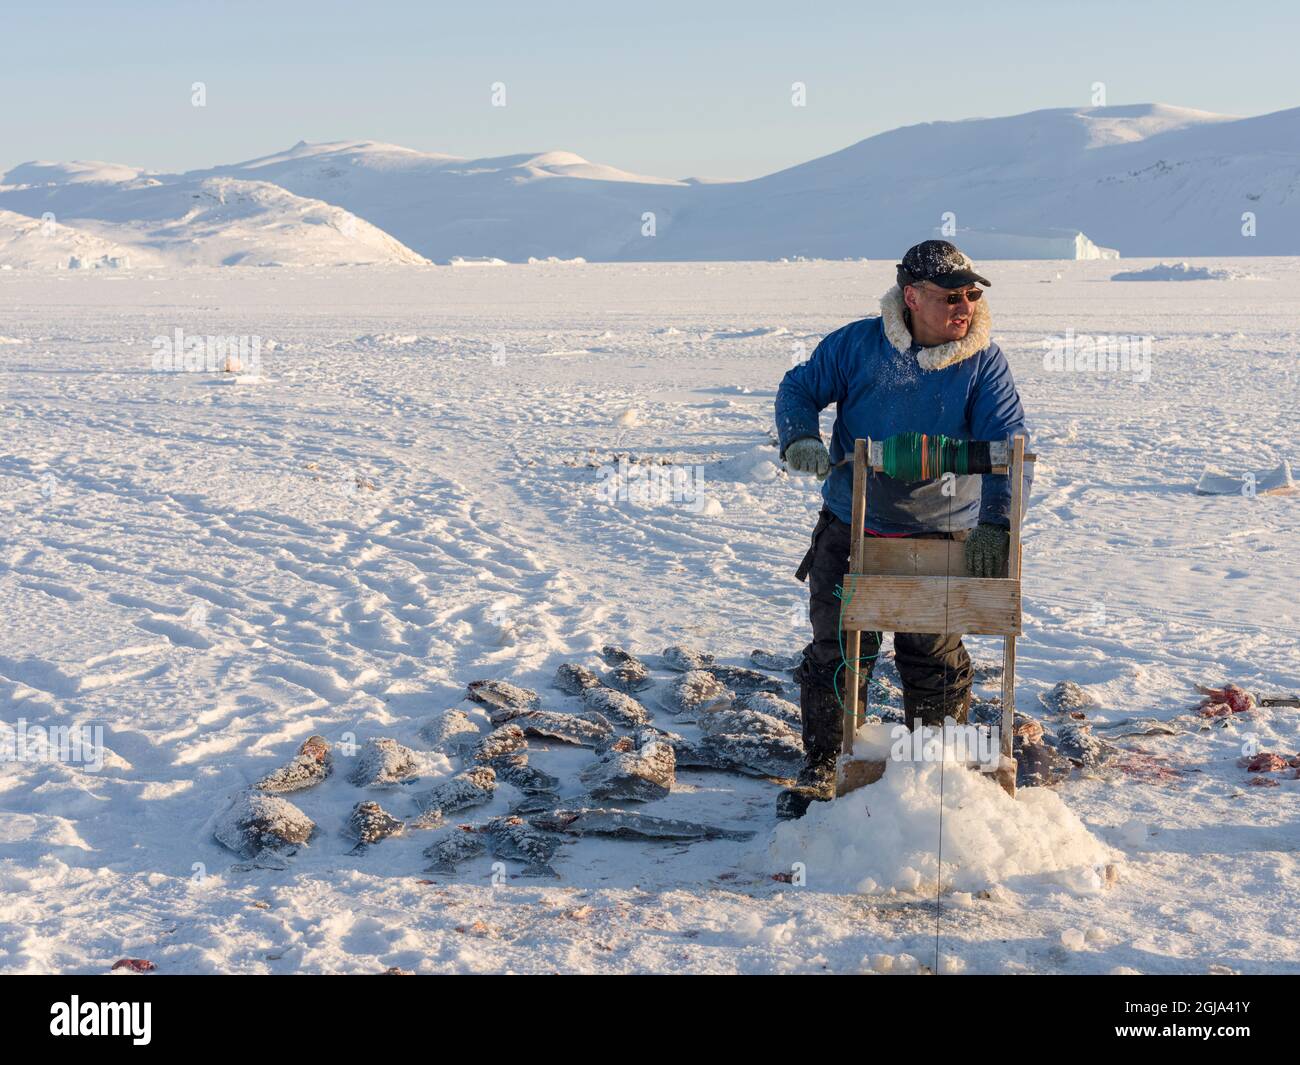 Fisherman with caught halibut on the sea ice of the frozen Melville Bay, near Kullorsuaq, Greenland, Danish territory. (Editorial Use Only) Stock Photo